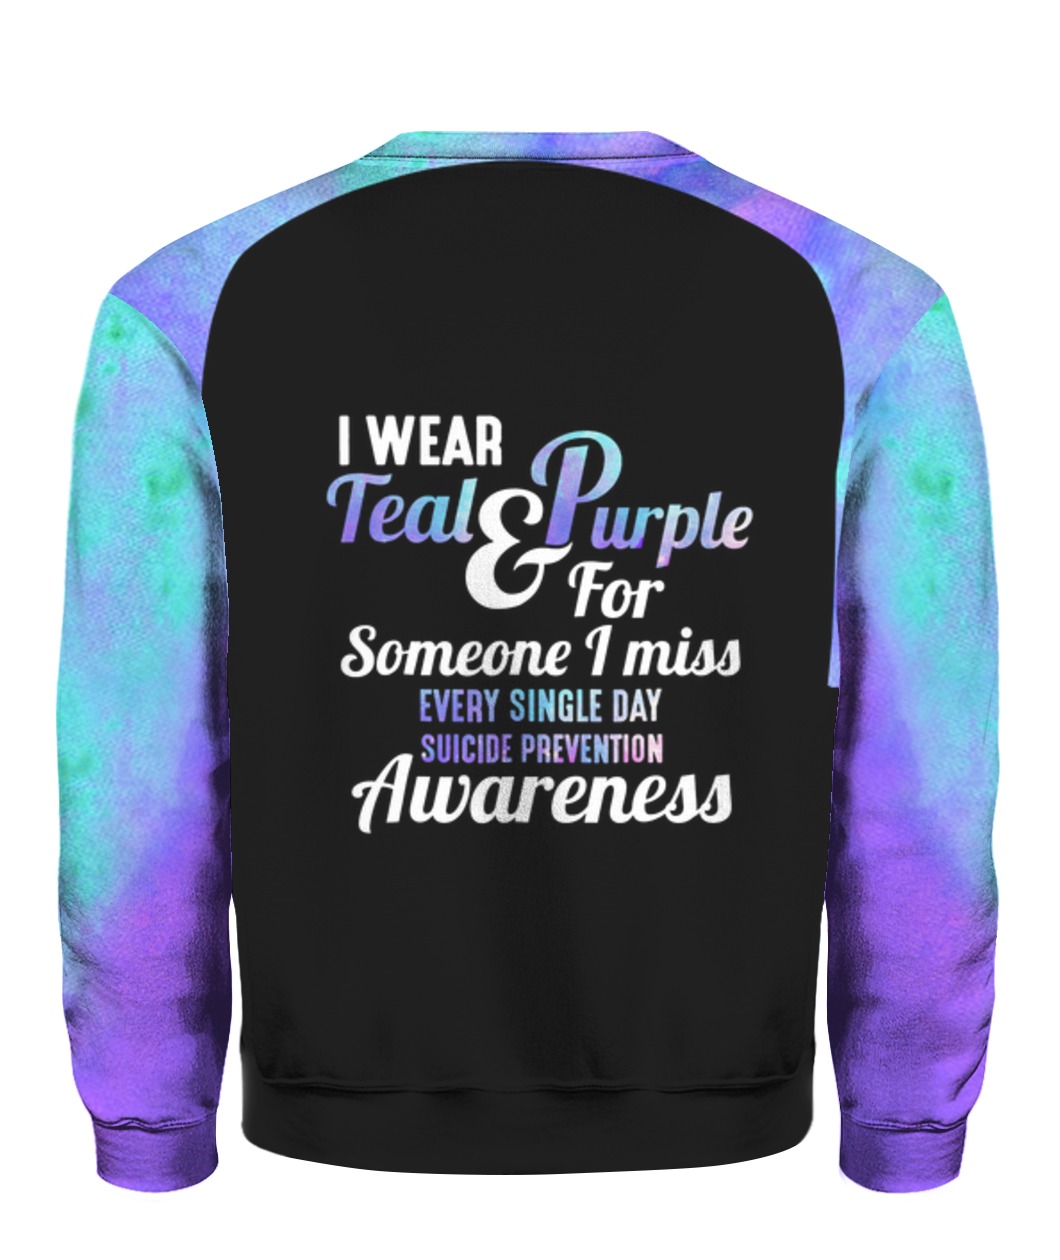 Ribbon suicide prevention awareness teal and purple full printing sweatshirt - back